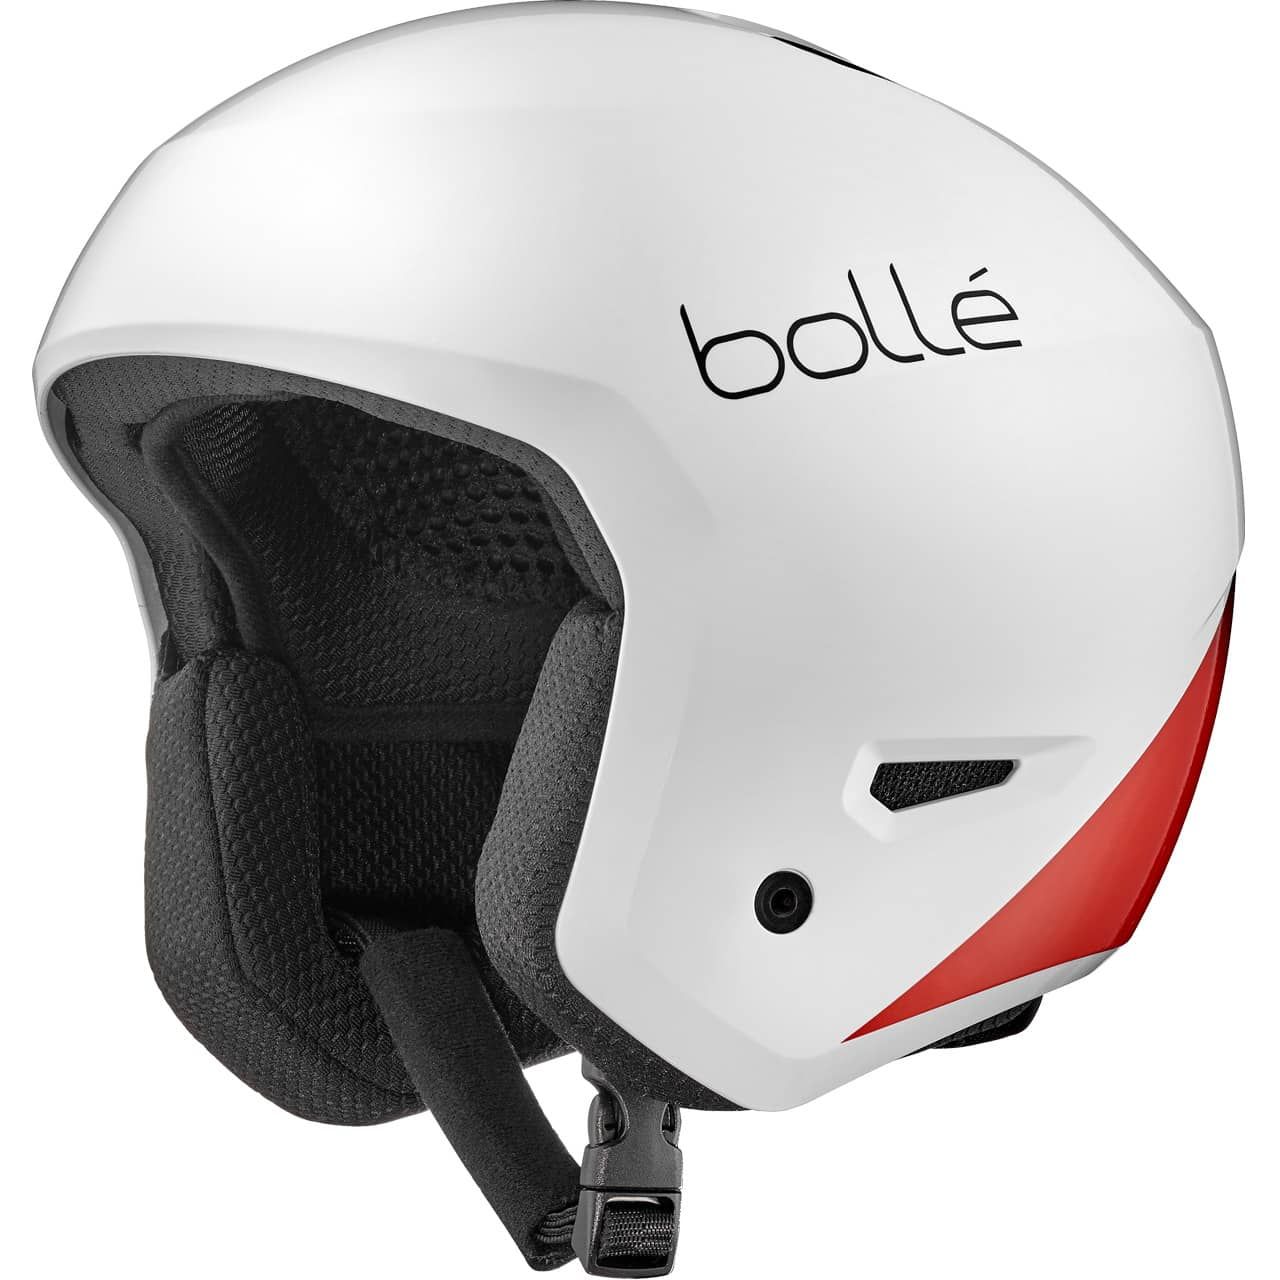 Bolle Medalist Youth white black red shiny von Bolle